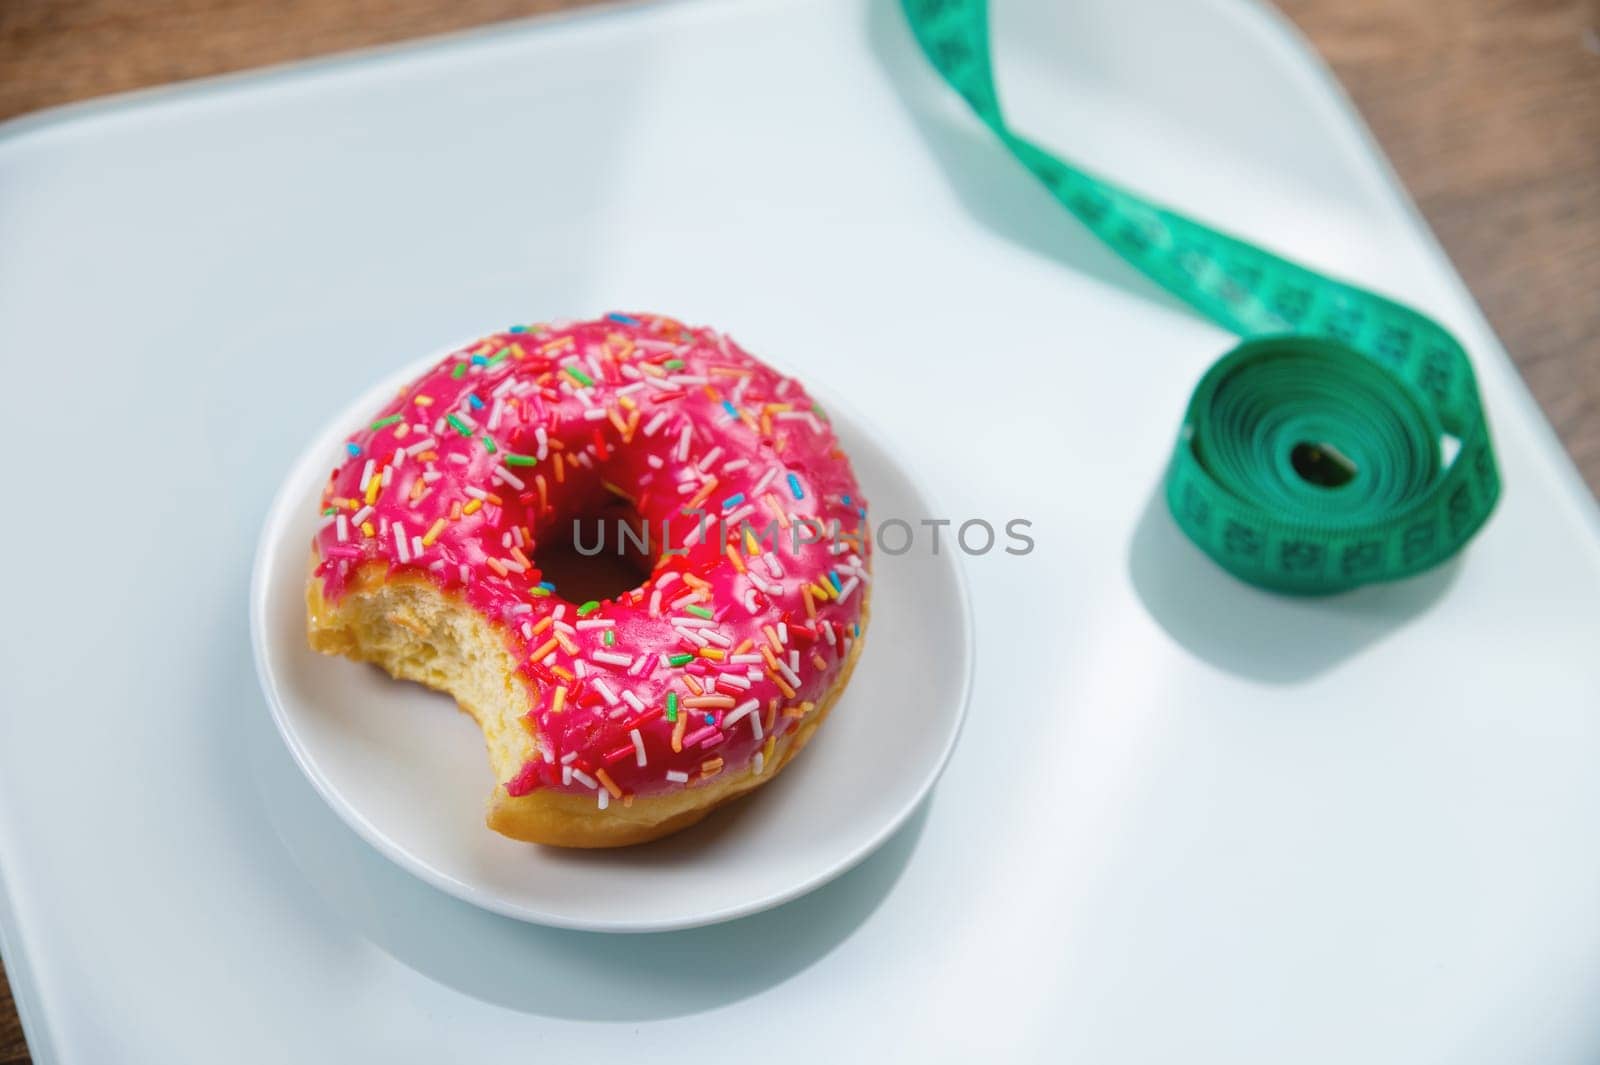 bitten sweet donut and a measuring tape. Unhealthy eating and obesity concept by yanik88